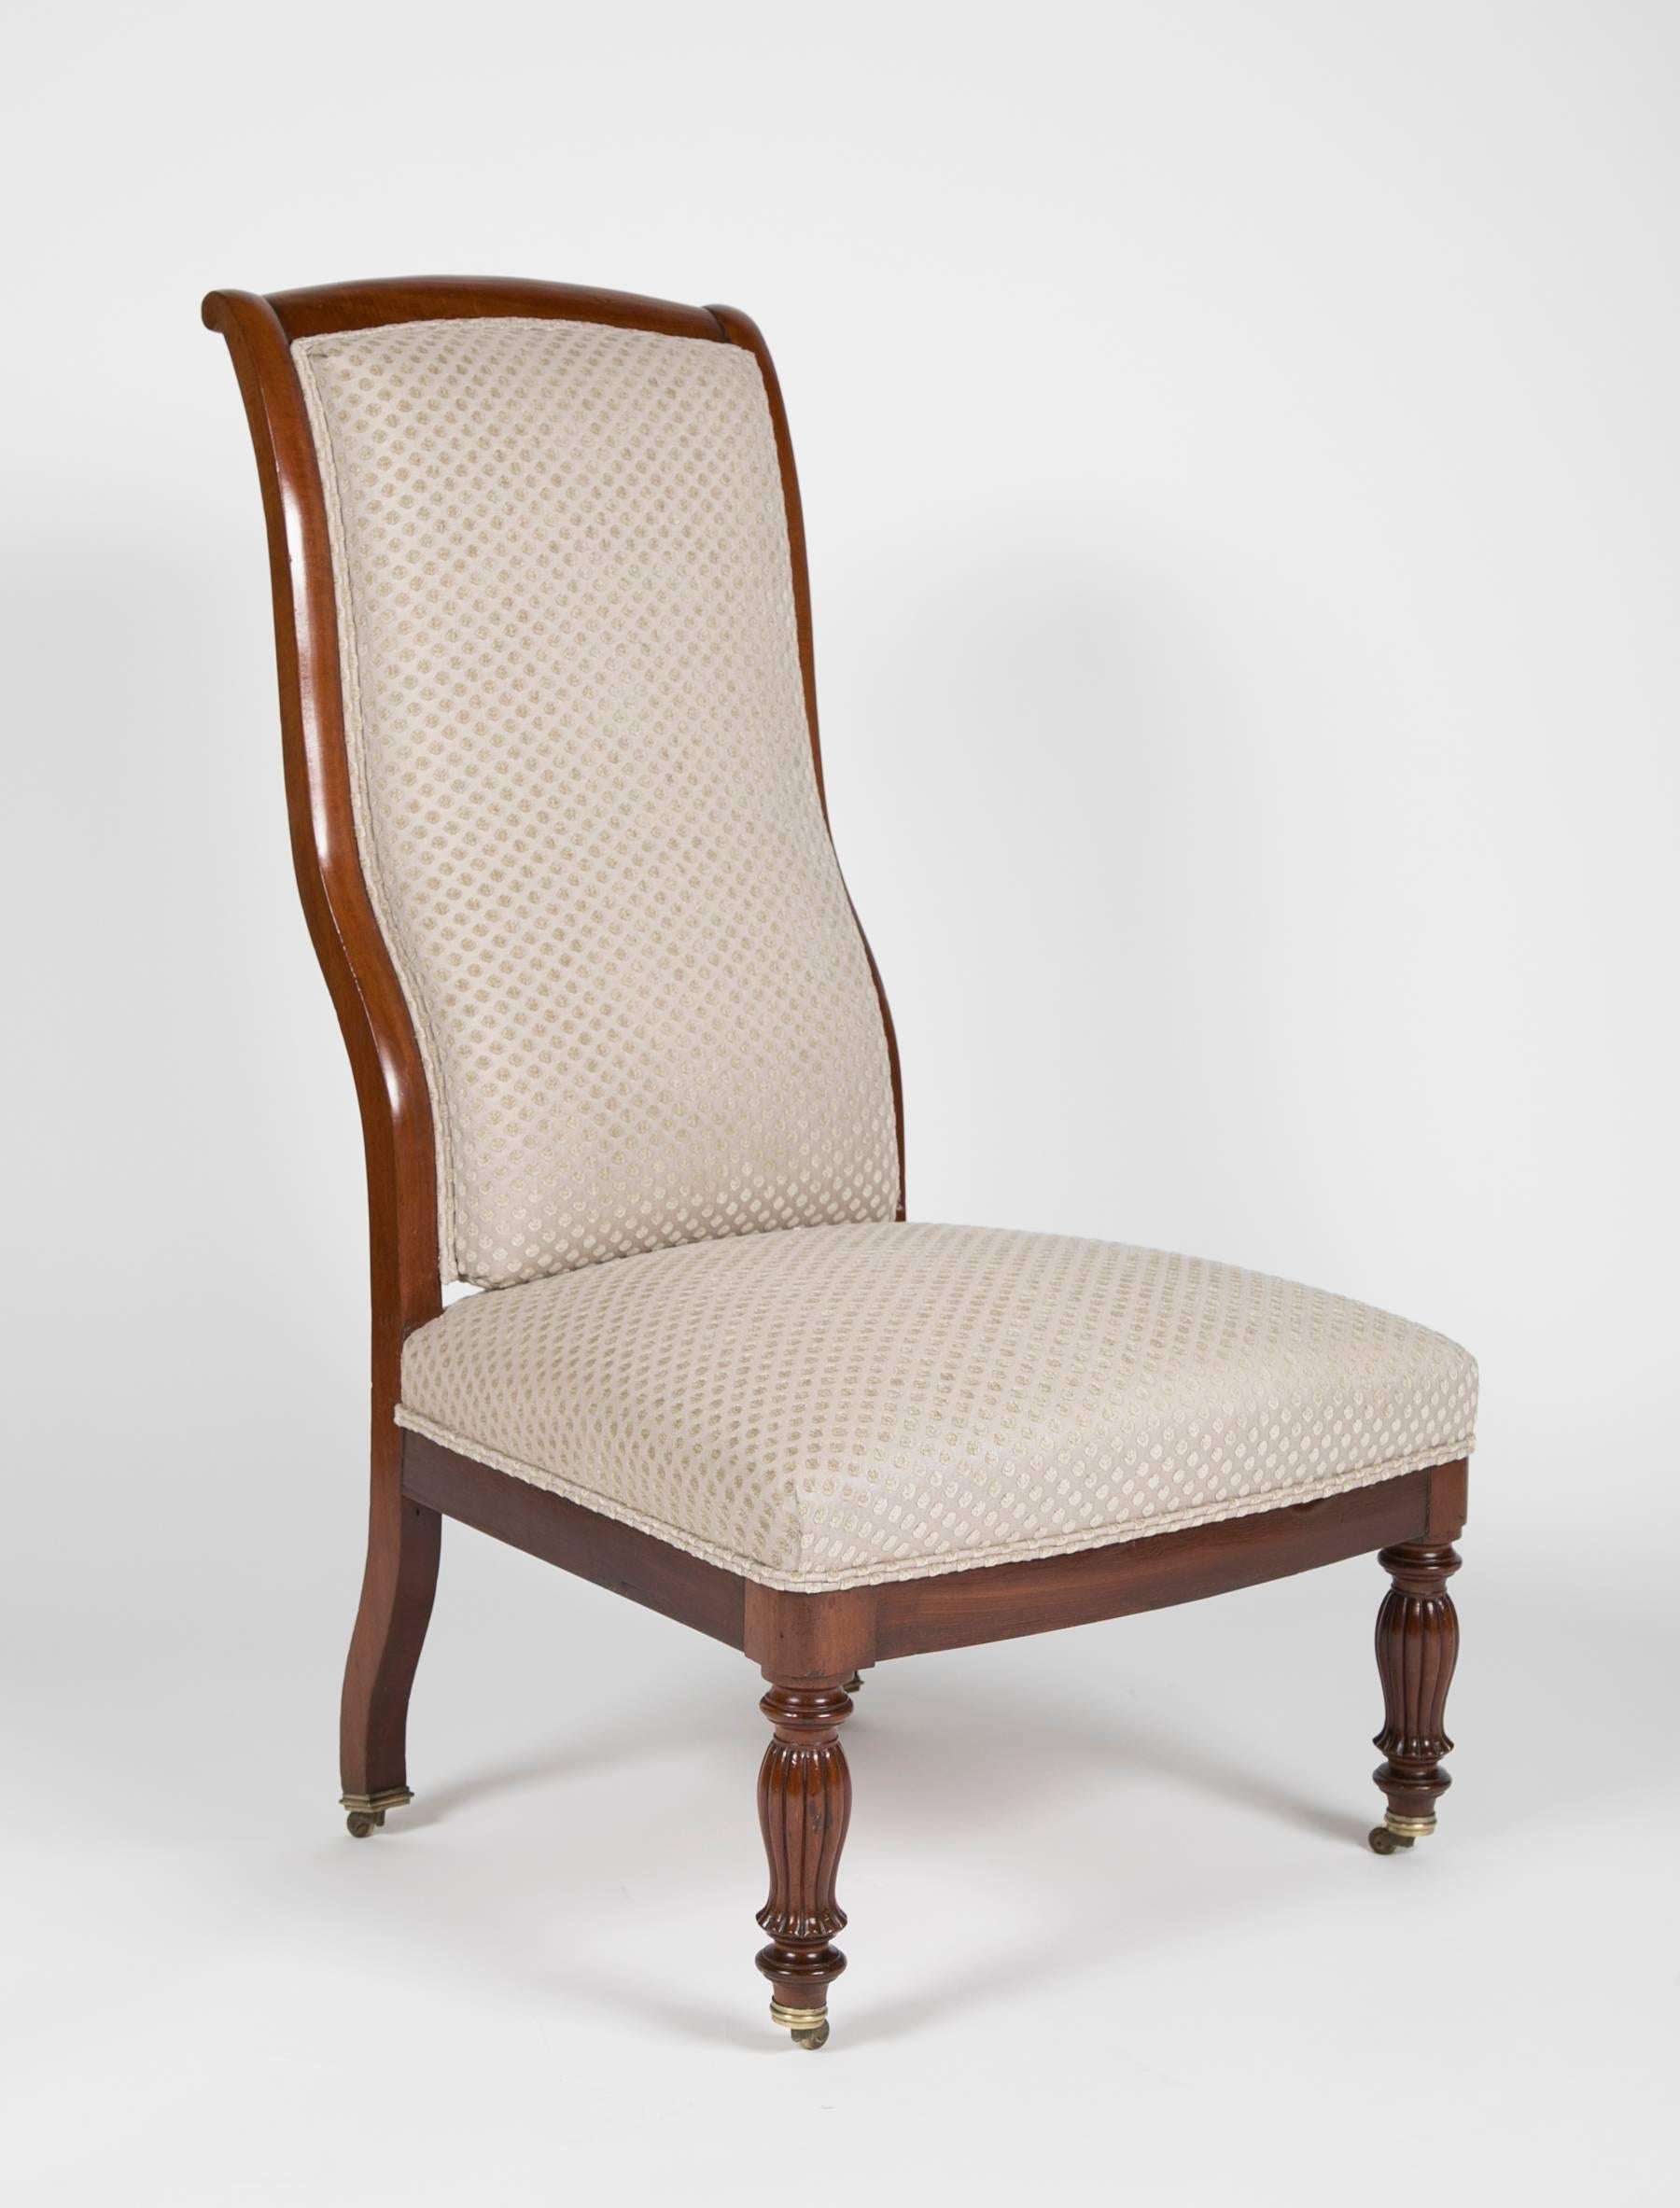 A matched pair of French Mahogany chauffeufes/Slipper chairs, circa 1840-1860. Newly upholstered.